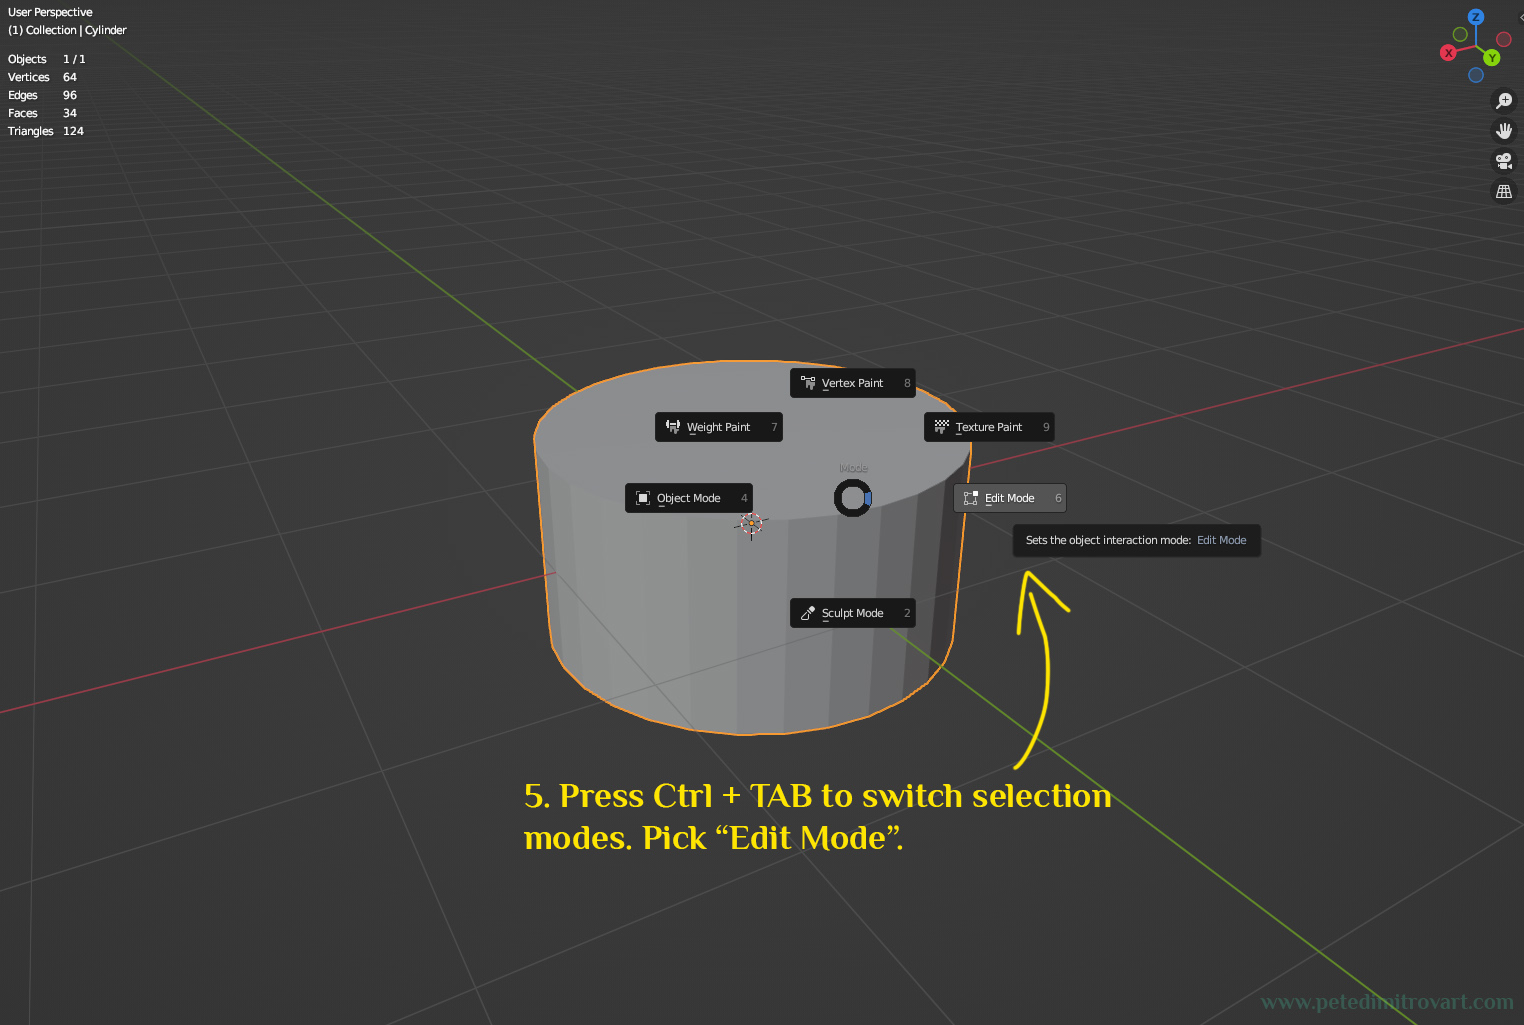 Blender screenshot. Shows the cylinder clicked on to be selected. Then CTRL + TAB is pressed on the keyboard, bringing up a radial menu with options like “Object Mode, Edit Mode, Certex Paint, Sculpt Mode” and more. The picture shows the mouse selecting “Edit Mode”. Yellow text on the picture reads: “5. Press Ctrl + TAB on keyboard to switch selection modes. Pick Edit Mode”.